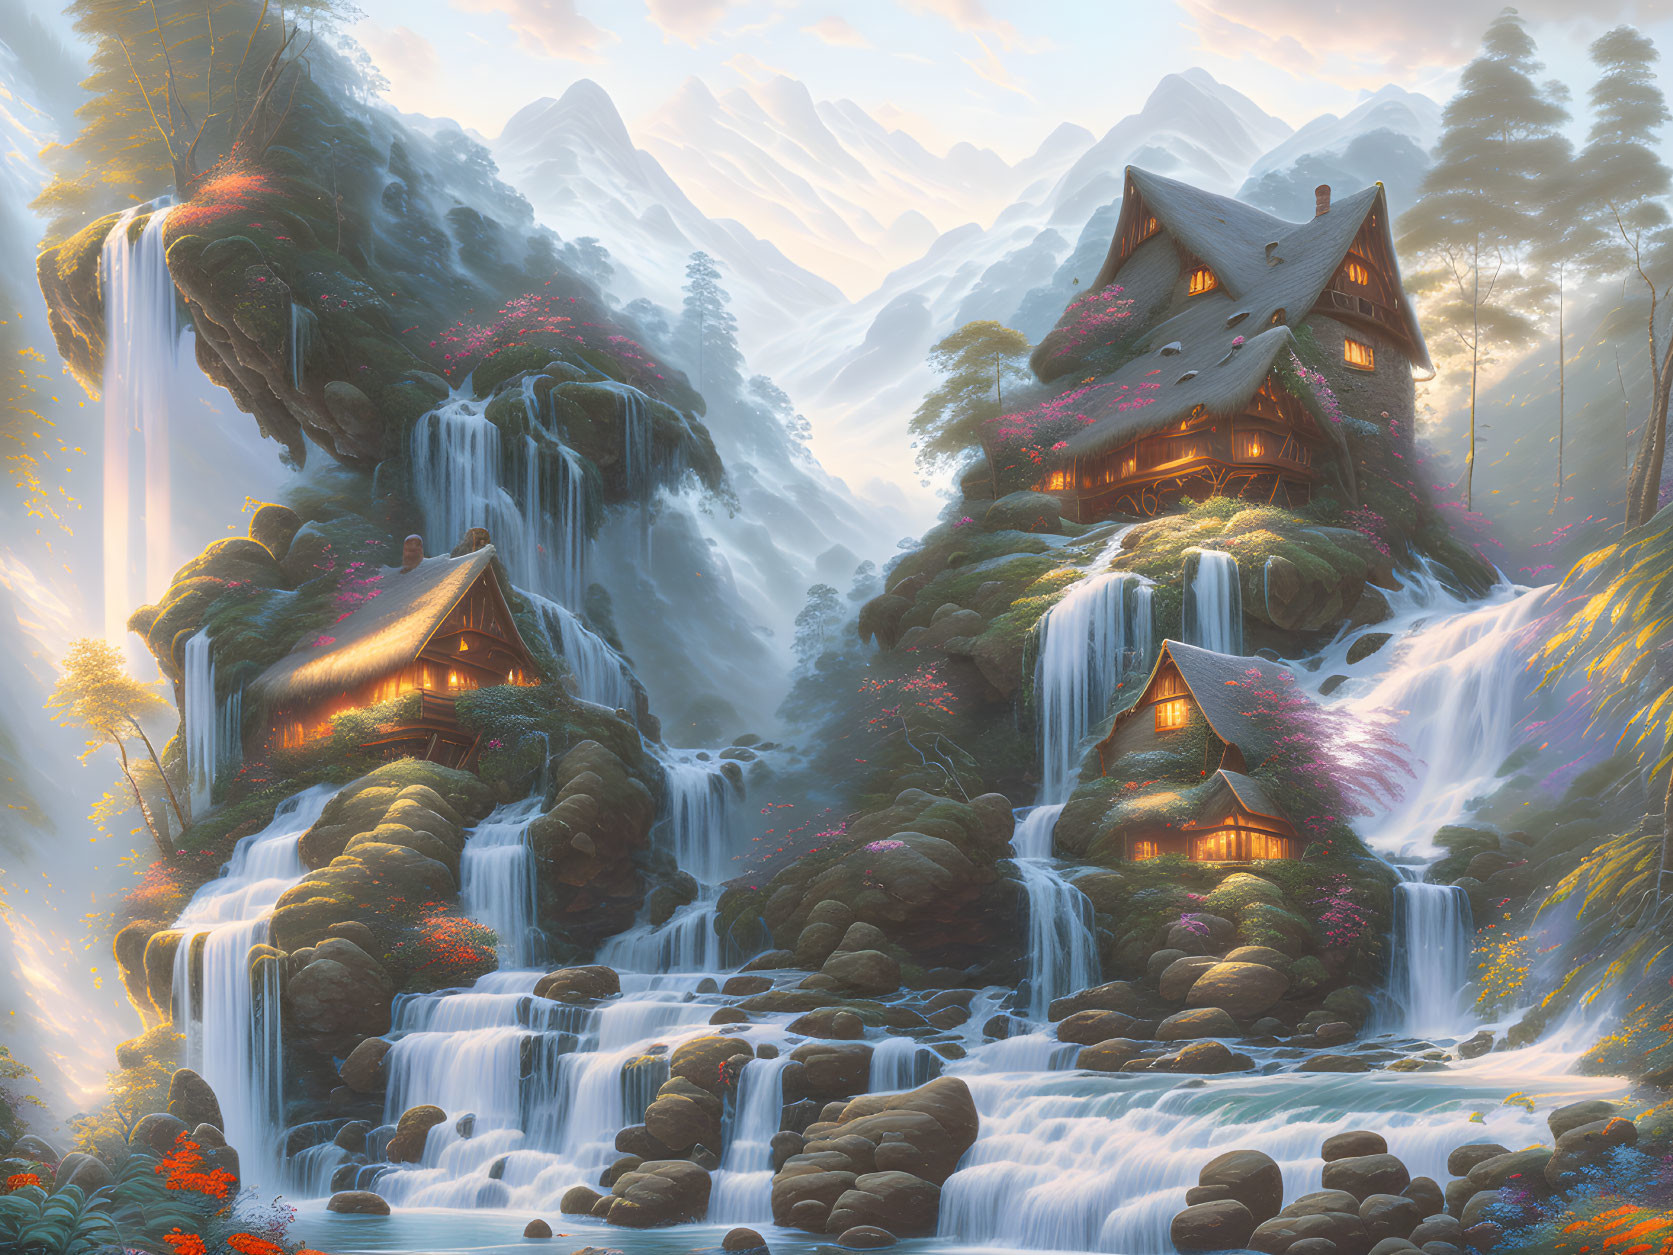 Scenic mountain landscape with waterfalls, greenery, and cliffside houses.